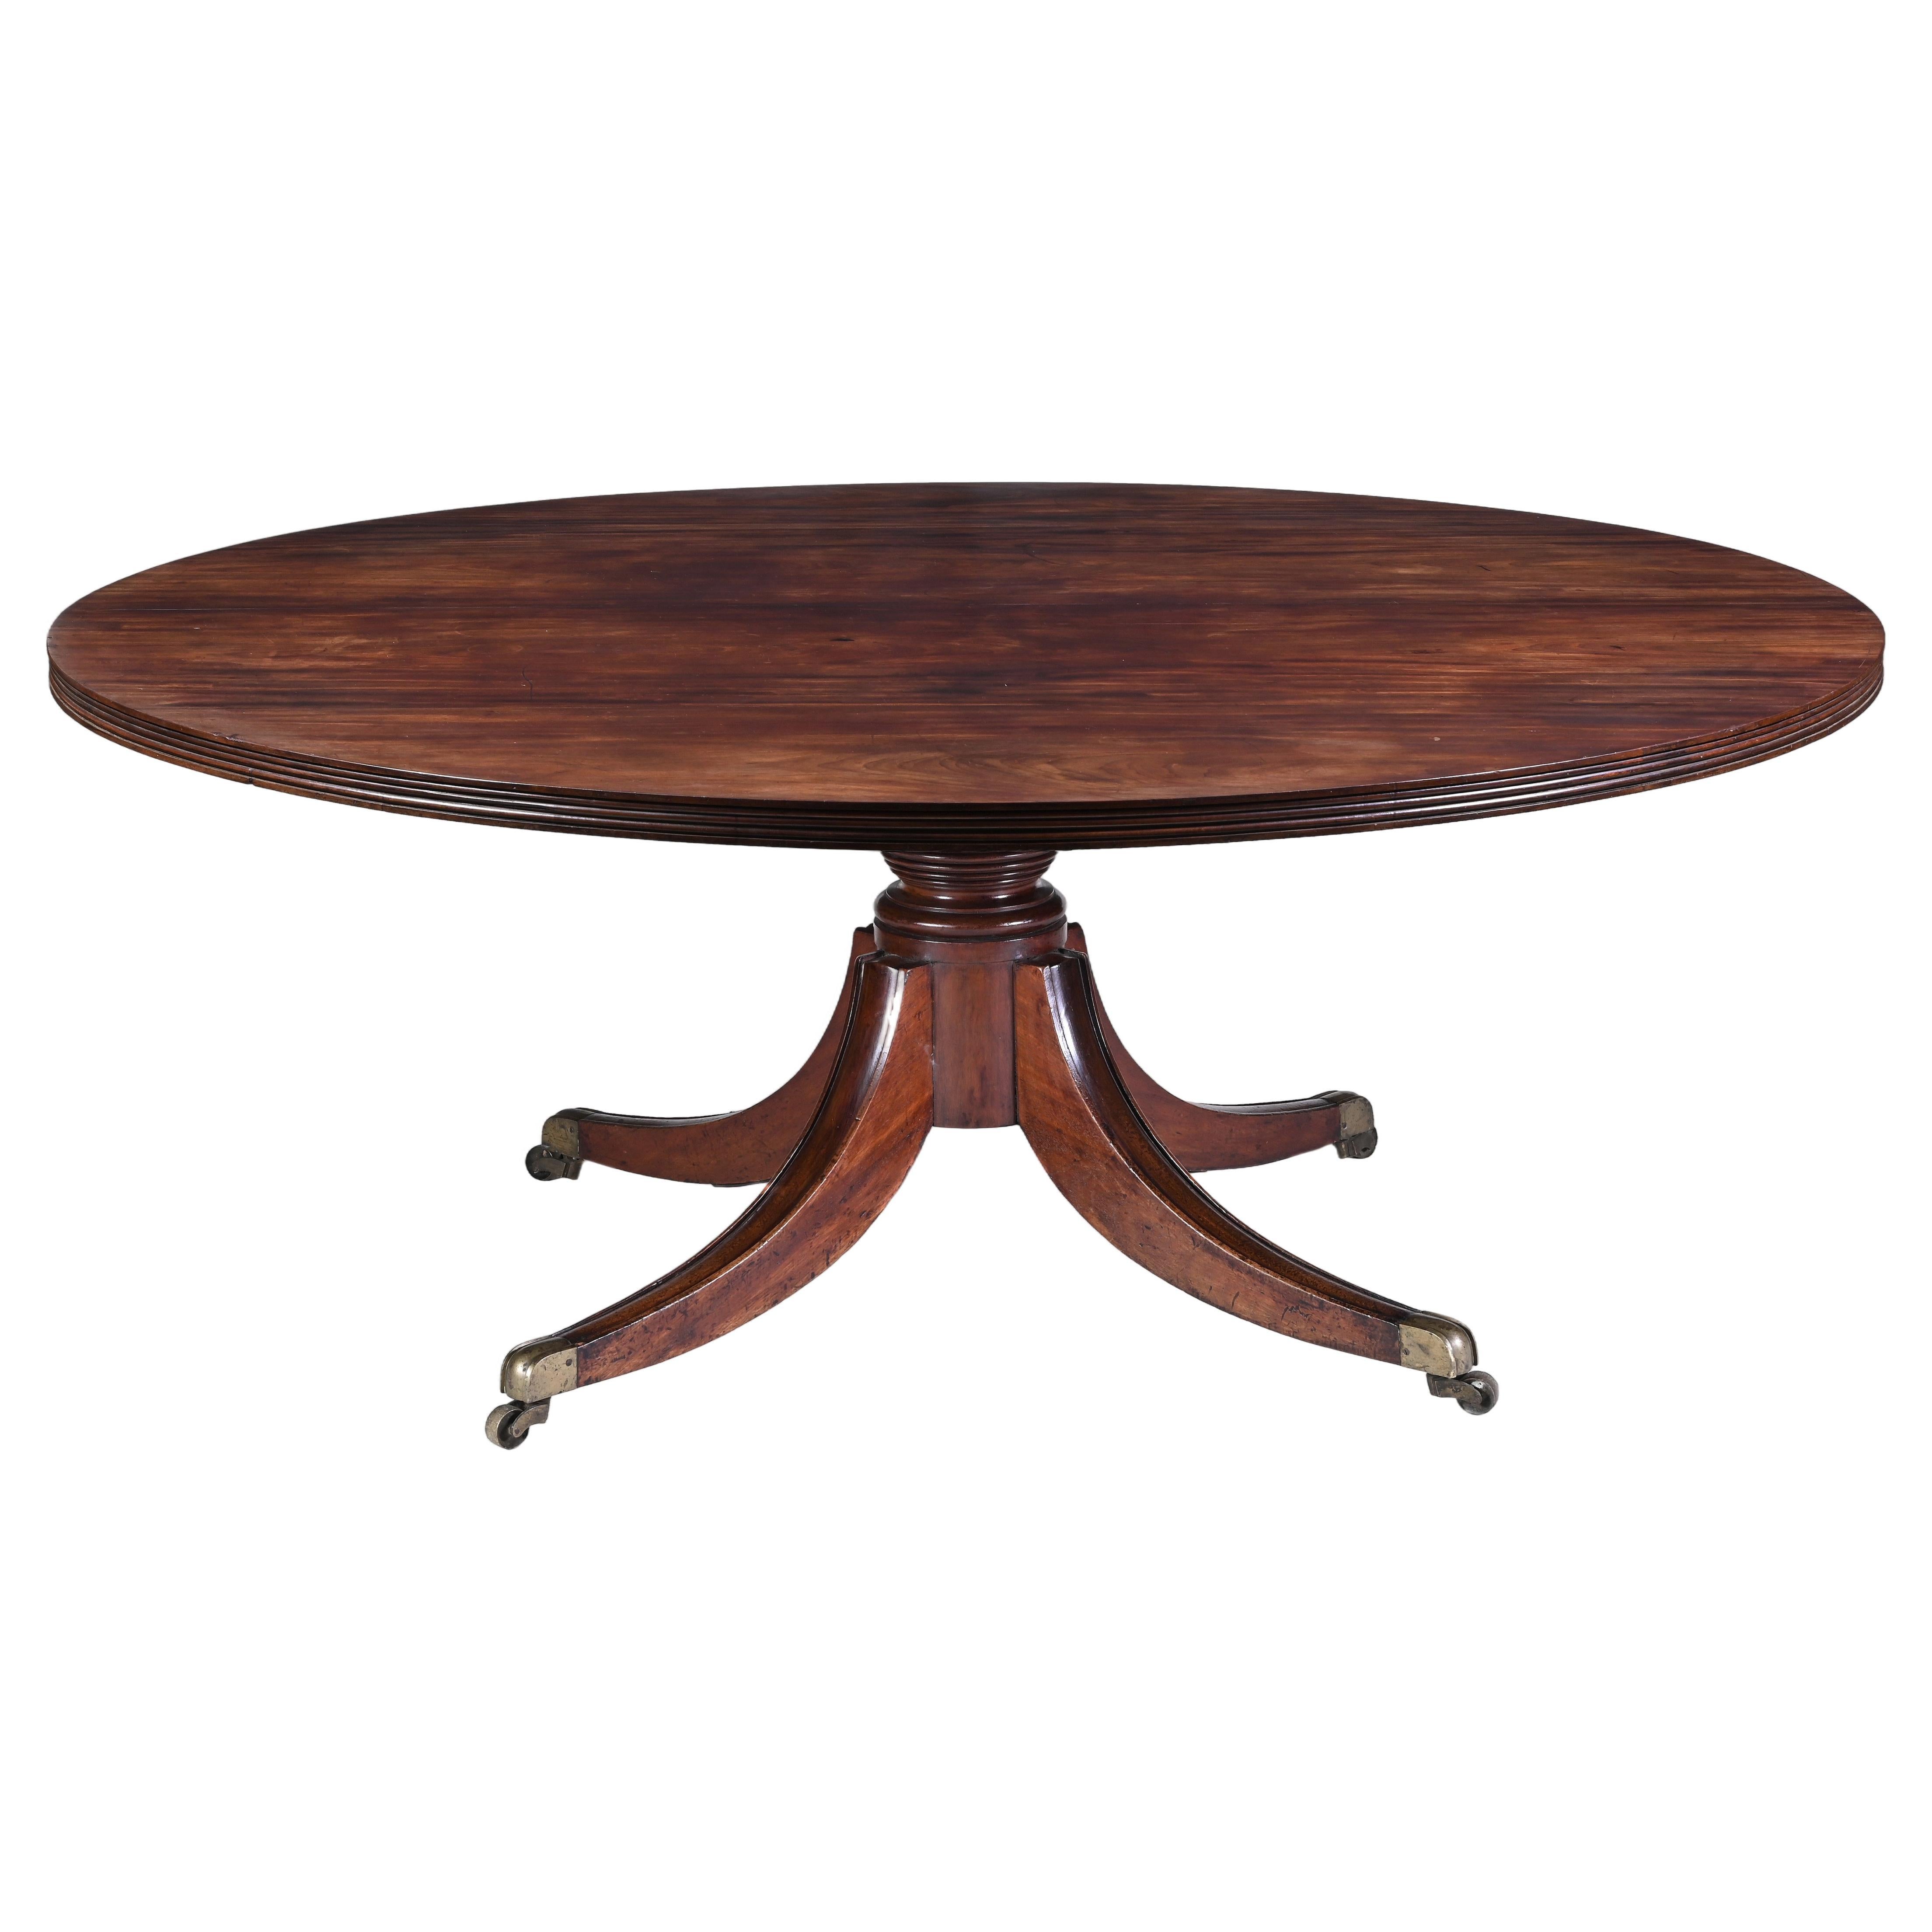 A Large Irish Regency Mahogany Round Dining Table For Sale